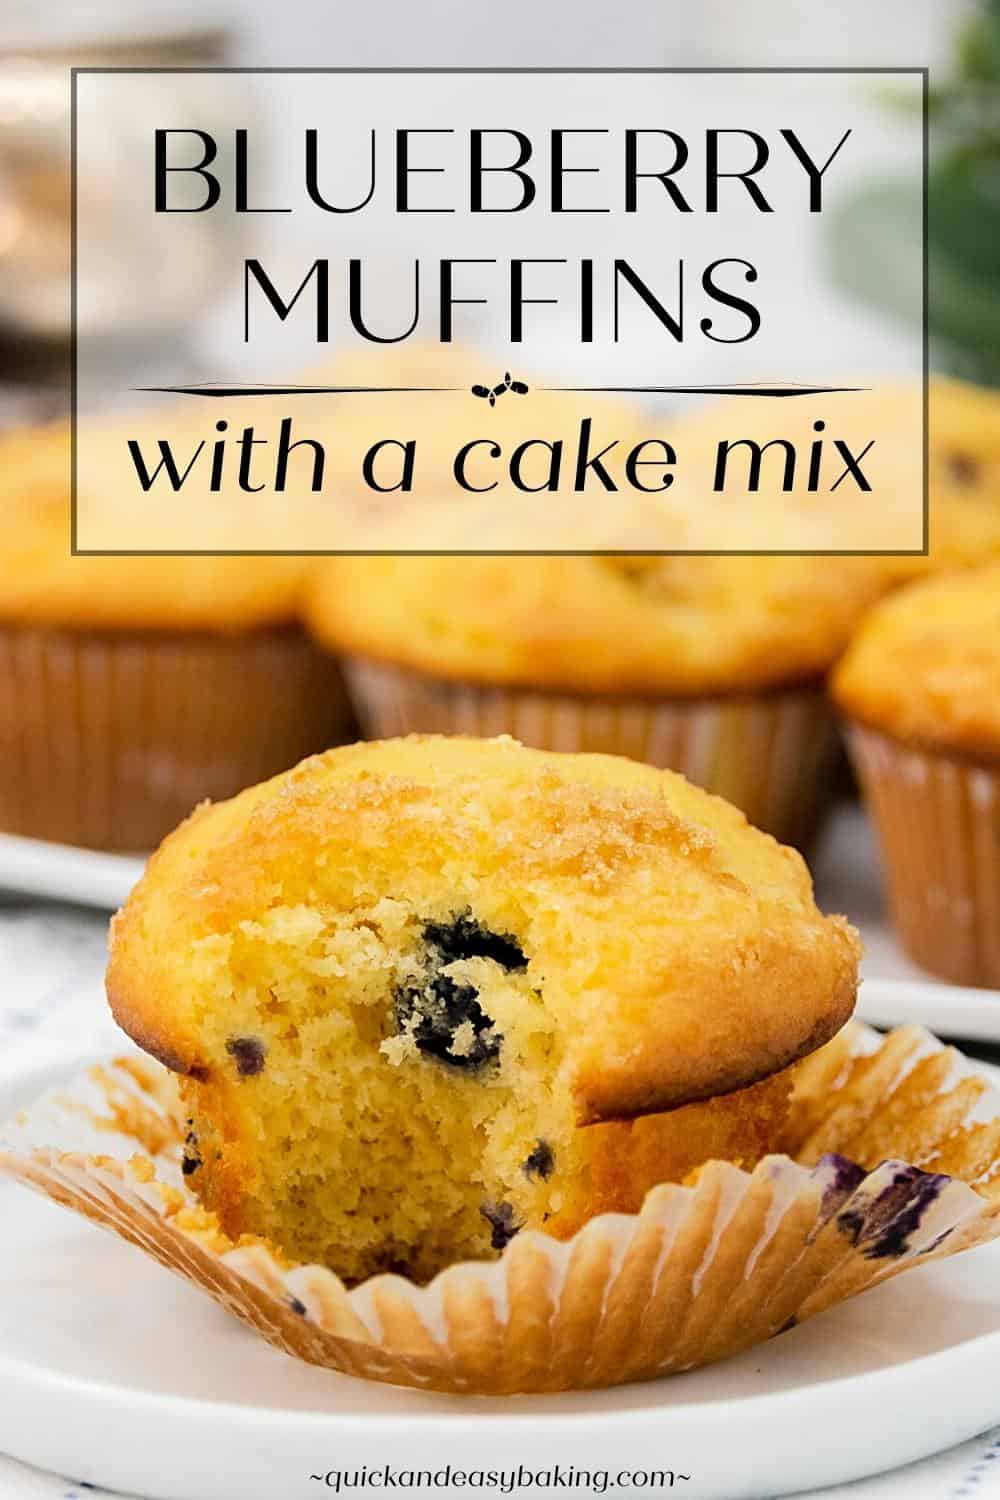 Baked muffin with a bite out of it unwrapped on a white plate with text overlay.